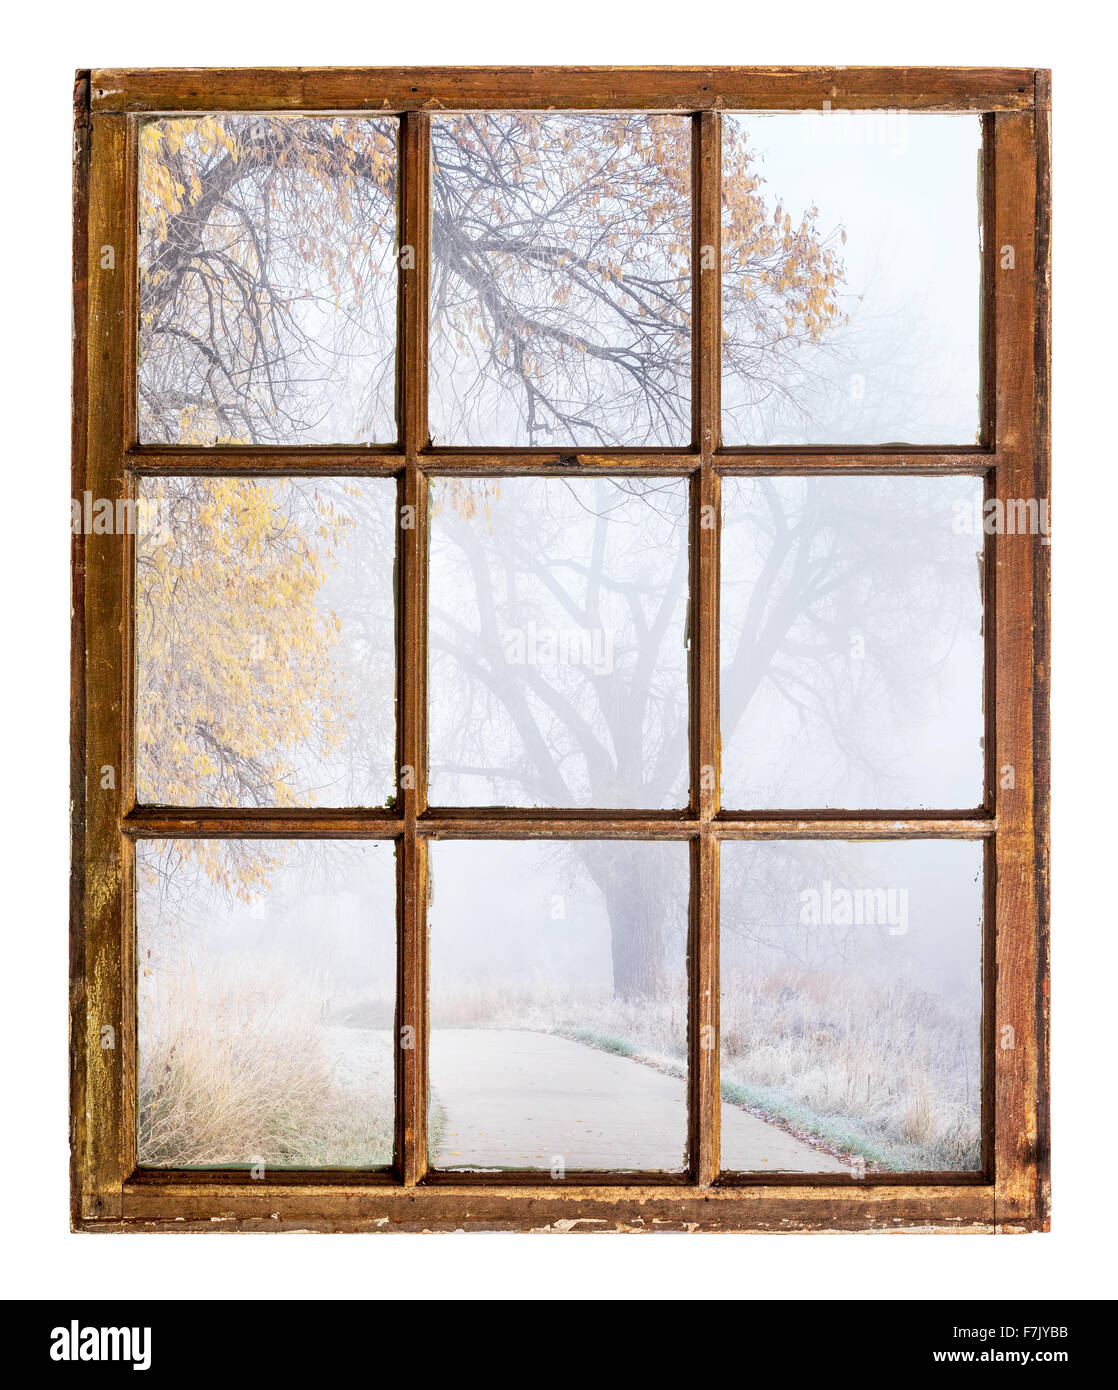 nostalgic autumn scene, foggy park trail - an abstract view from a vintage sash window Stock Photo